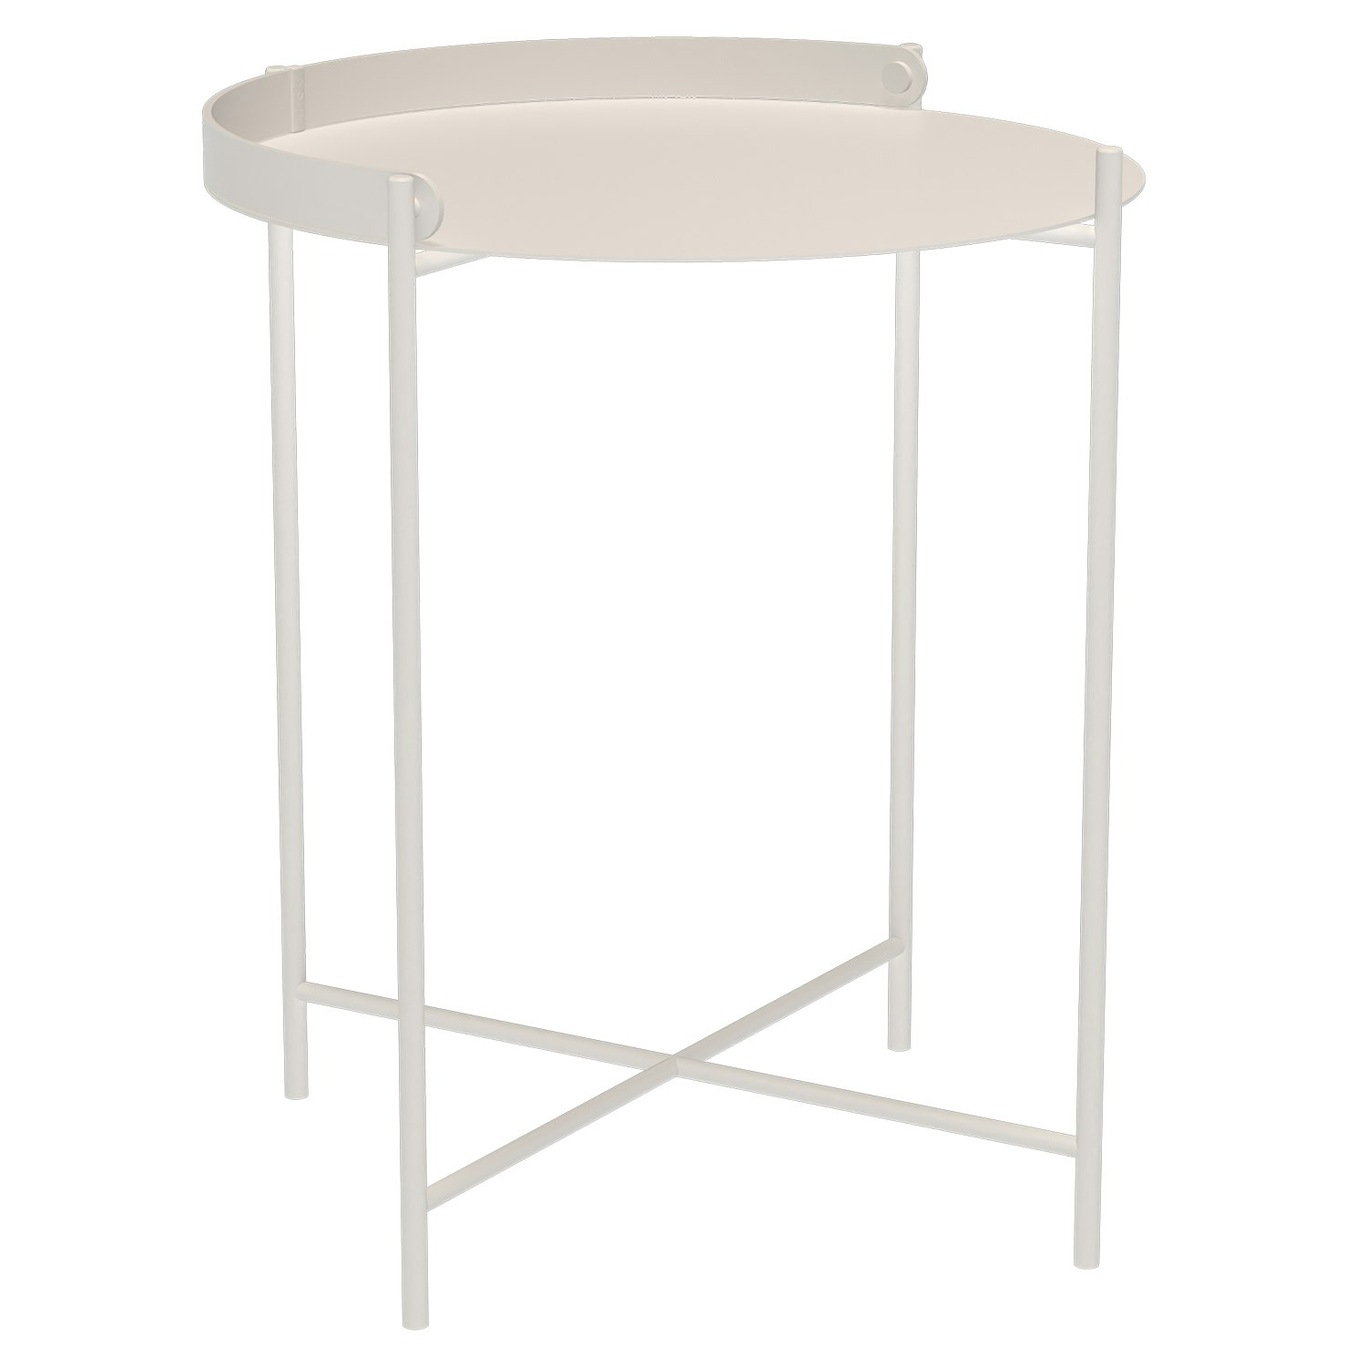 Edge Tray Table Ø46 cm, Muted White